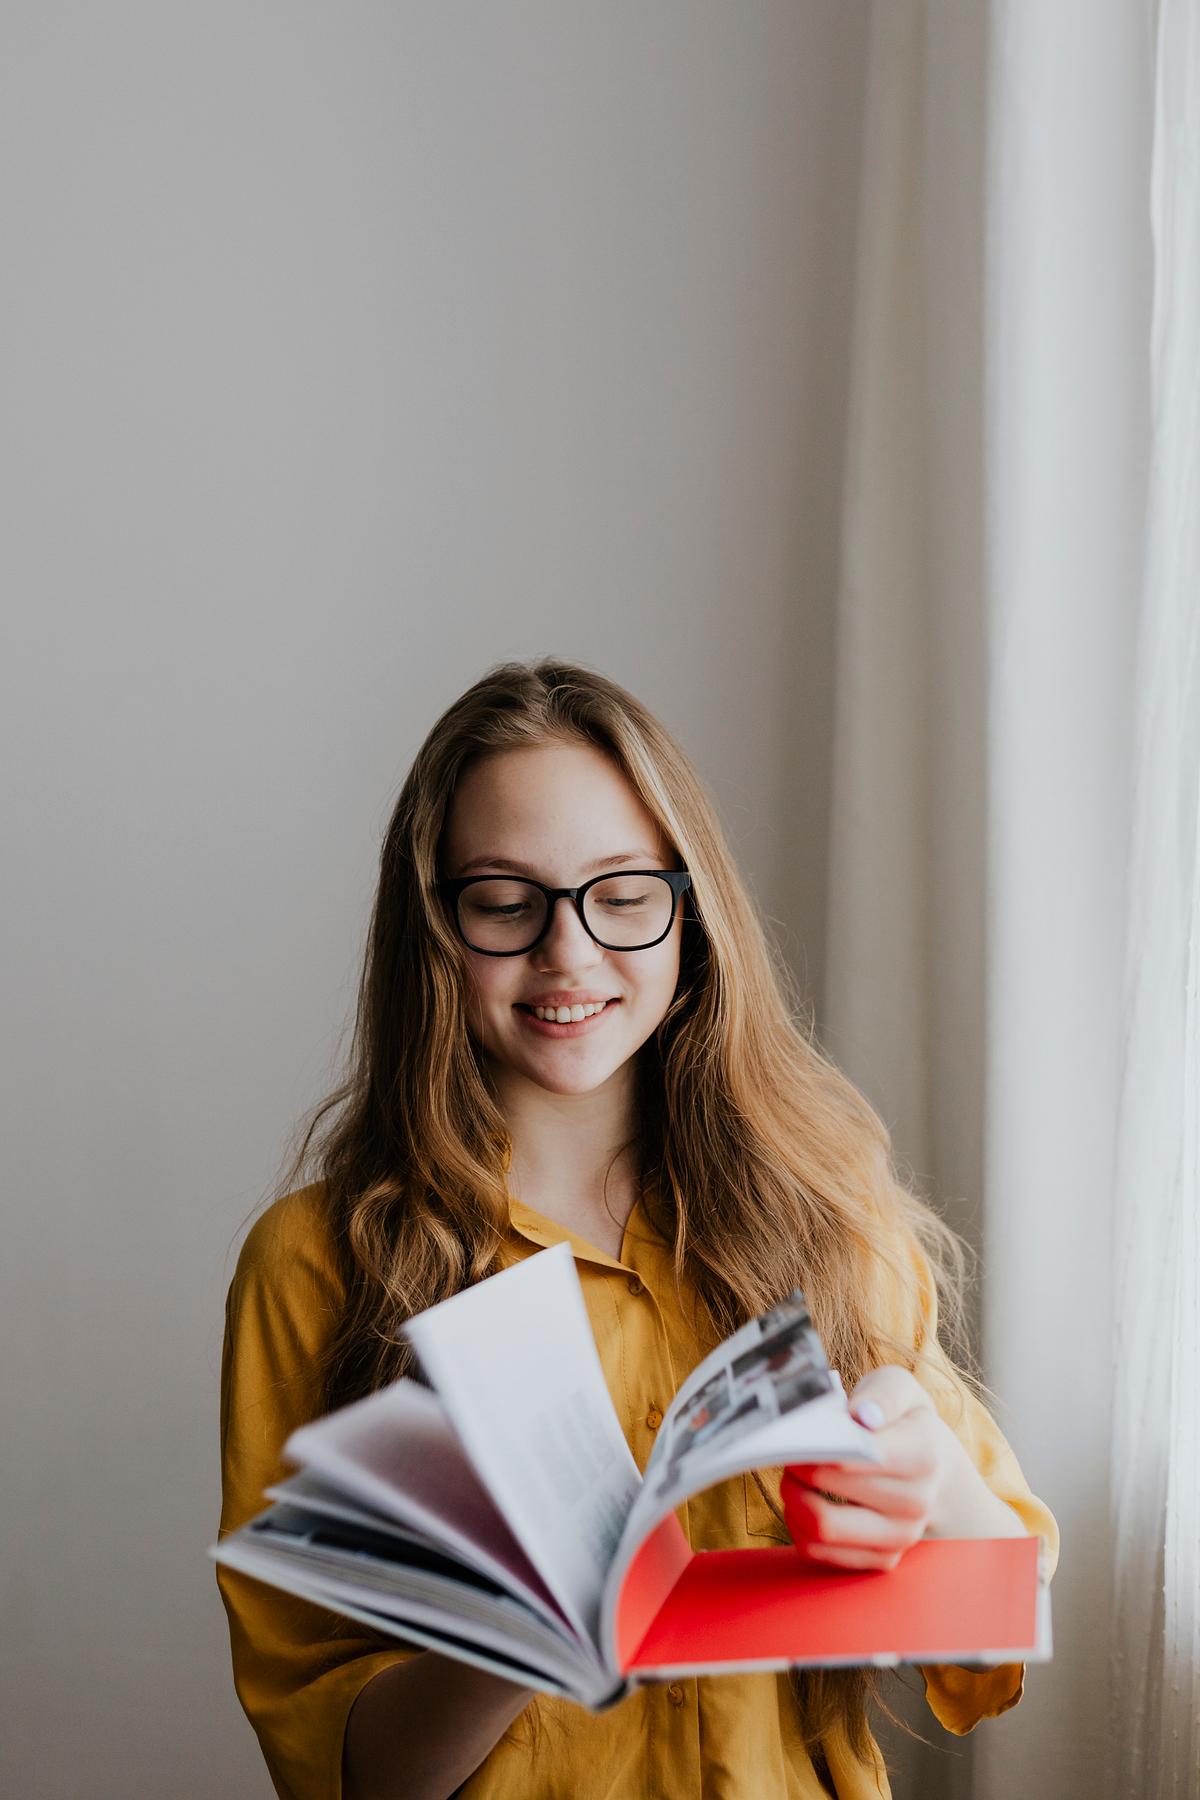 Cheerful blond girl opening a book | Premium Photo - rawpixel